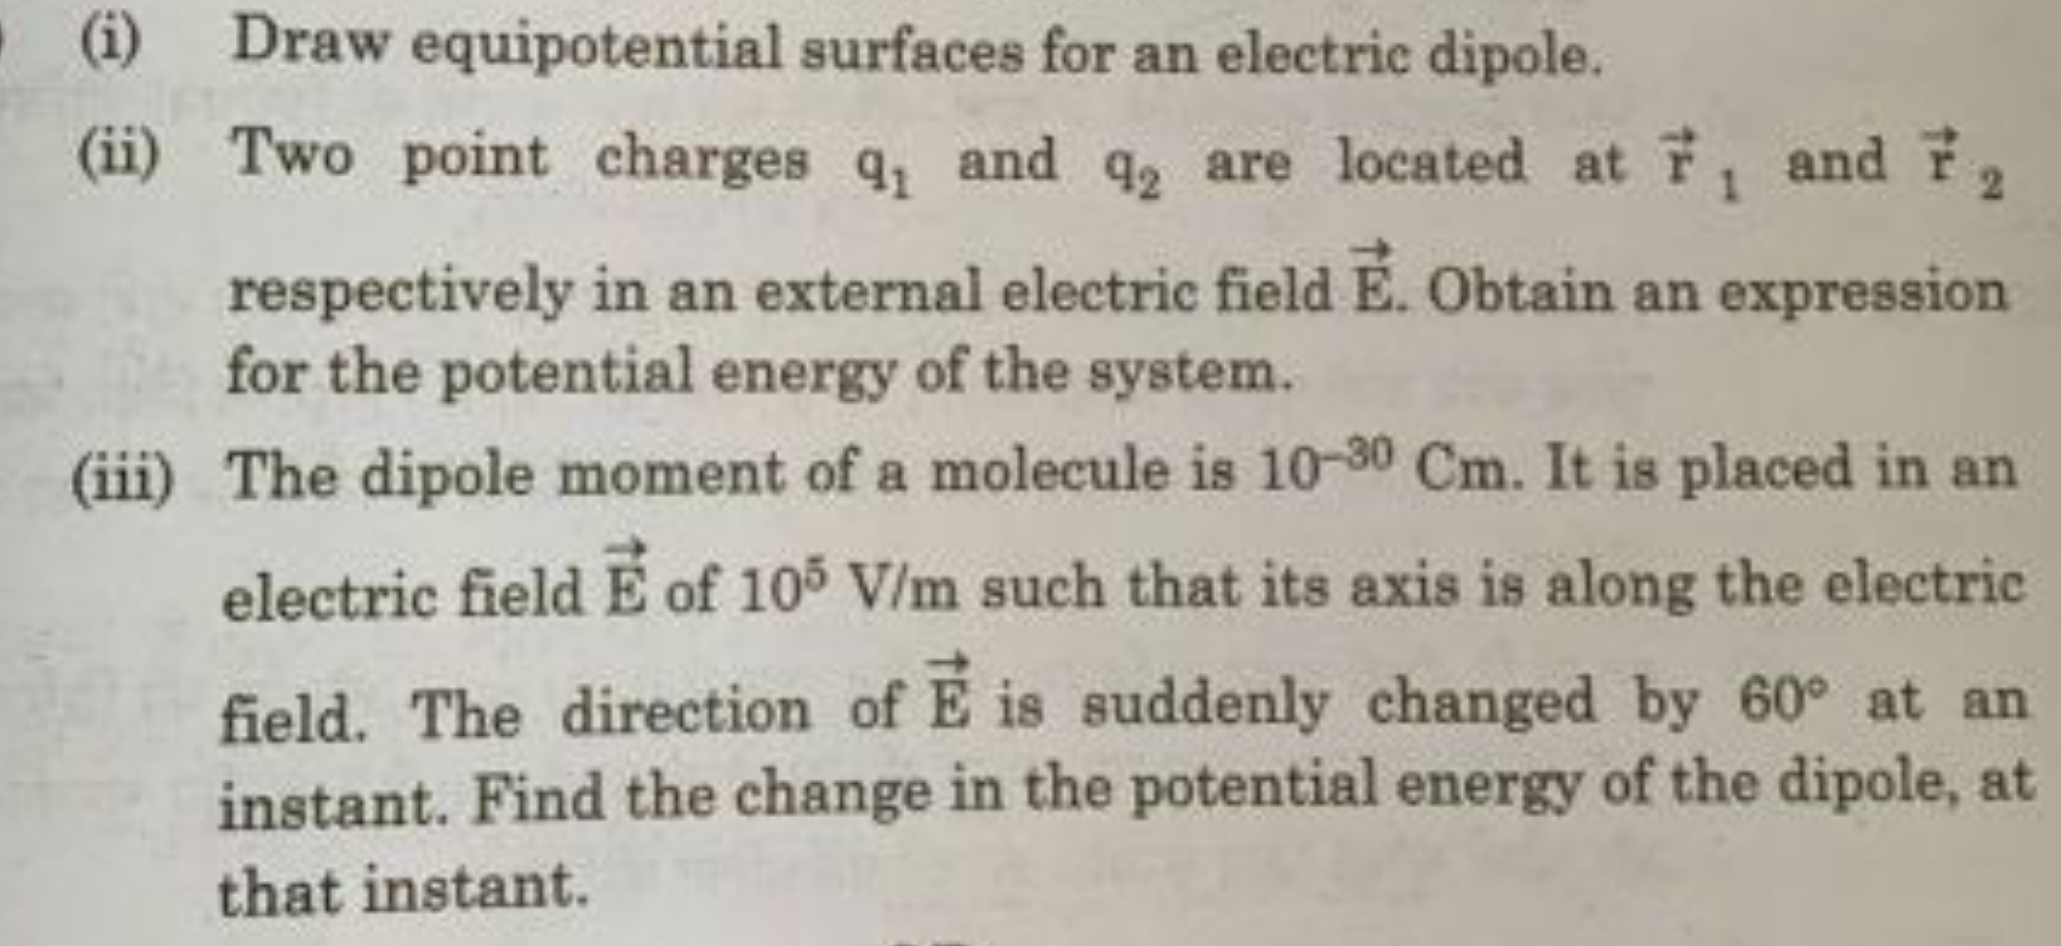 (i) Draw equipotential surfaces for an electric dipole.
(ii) Two point